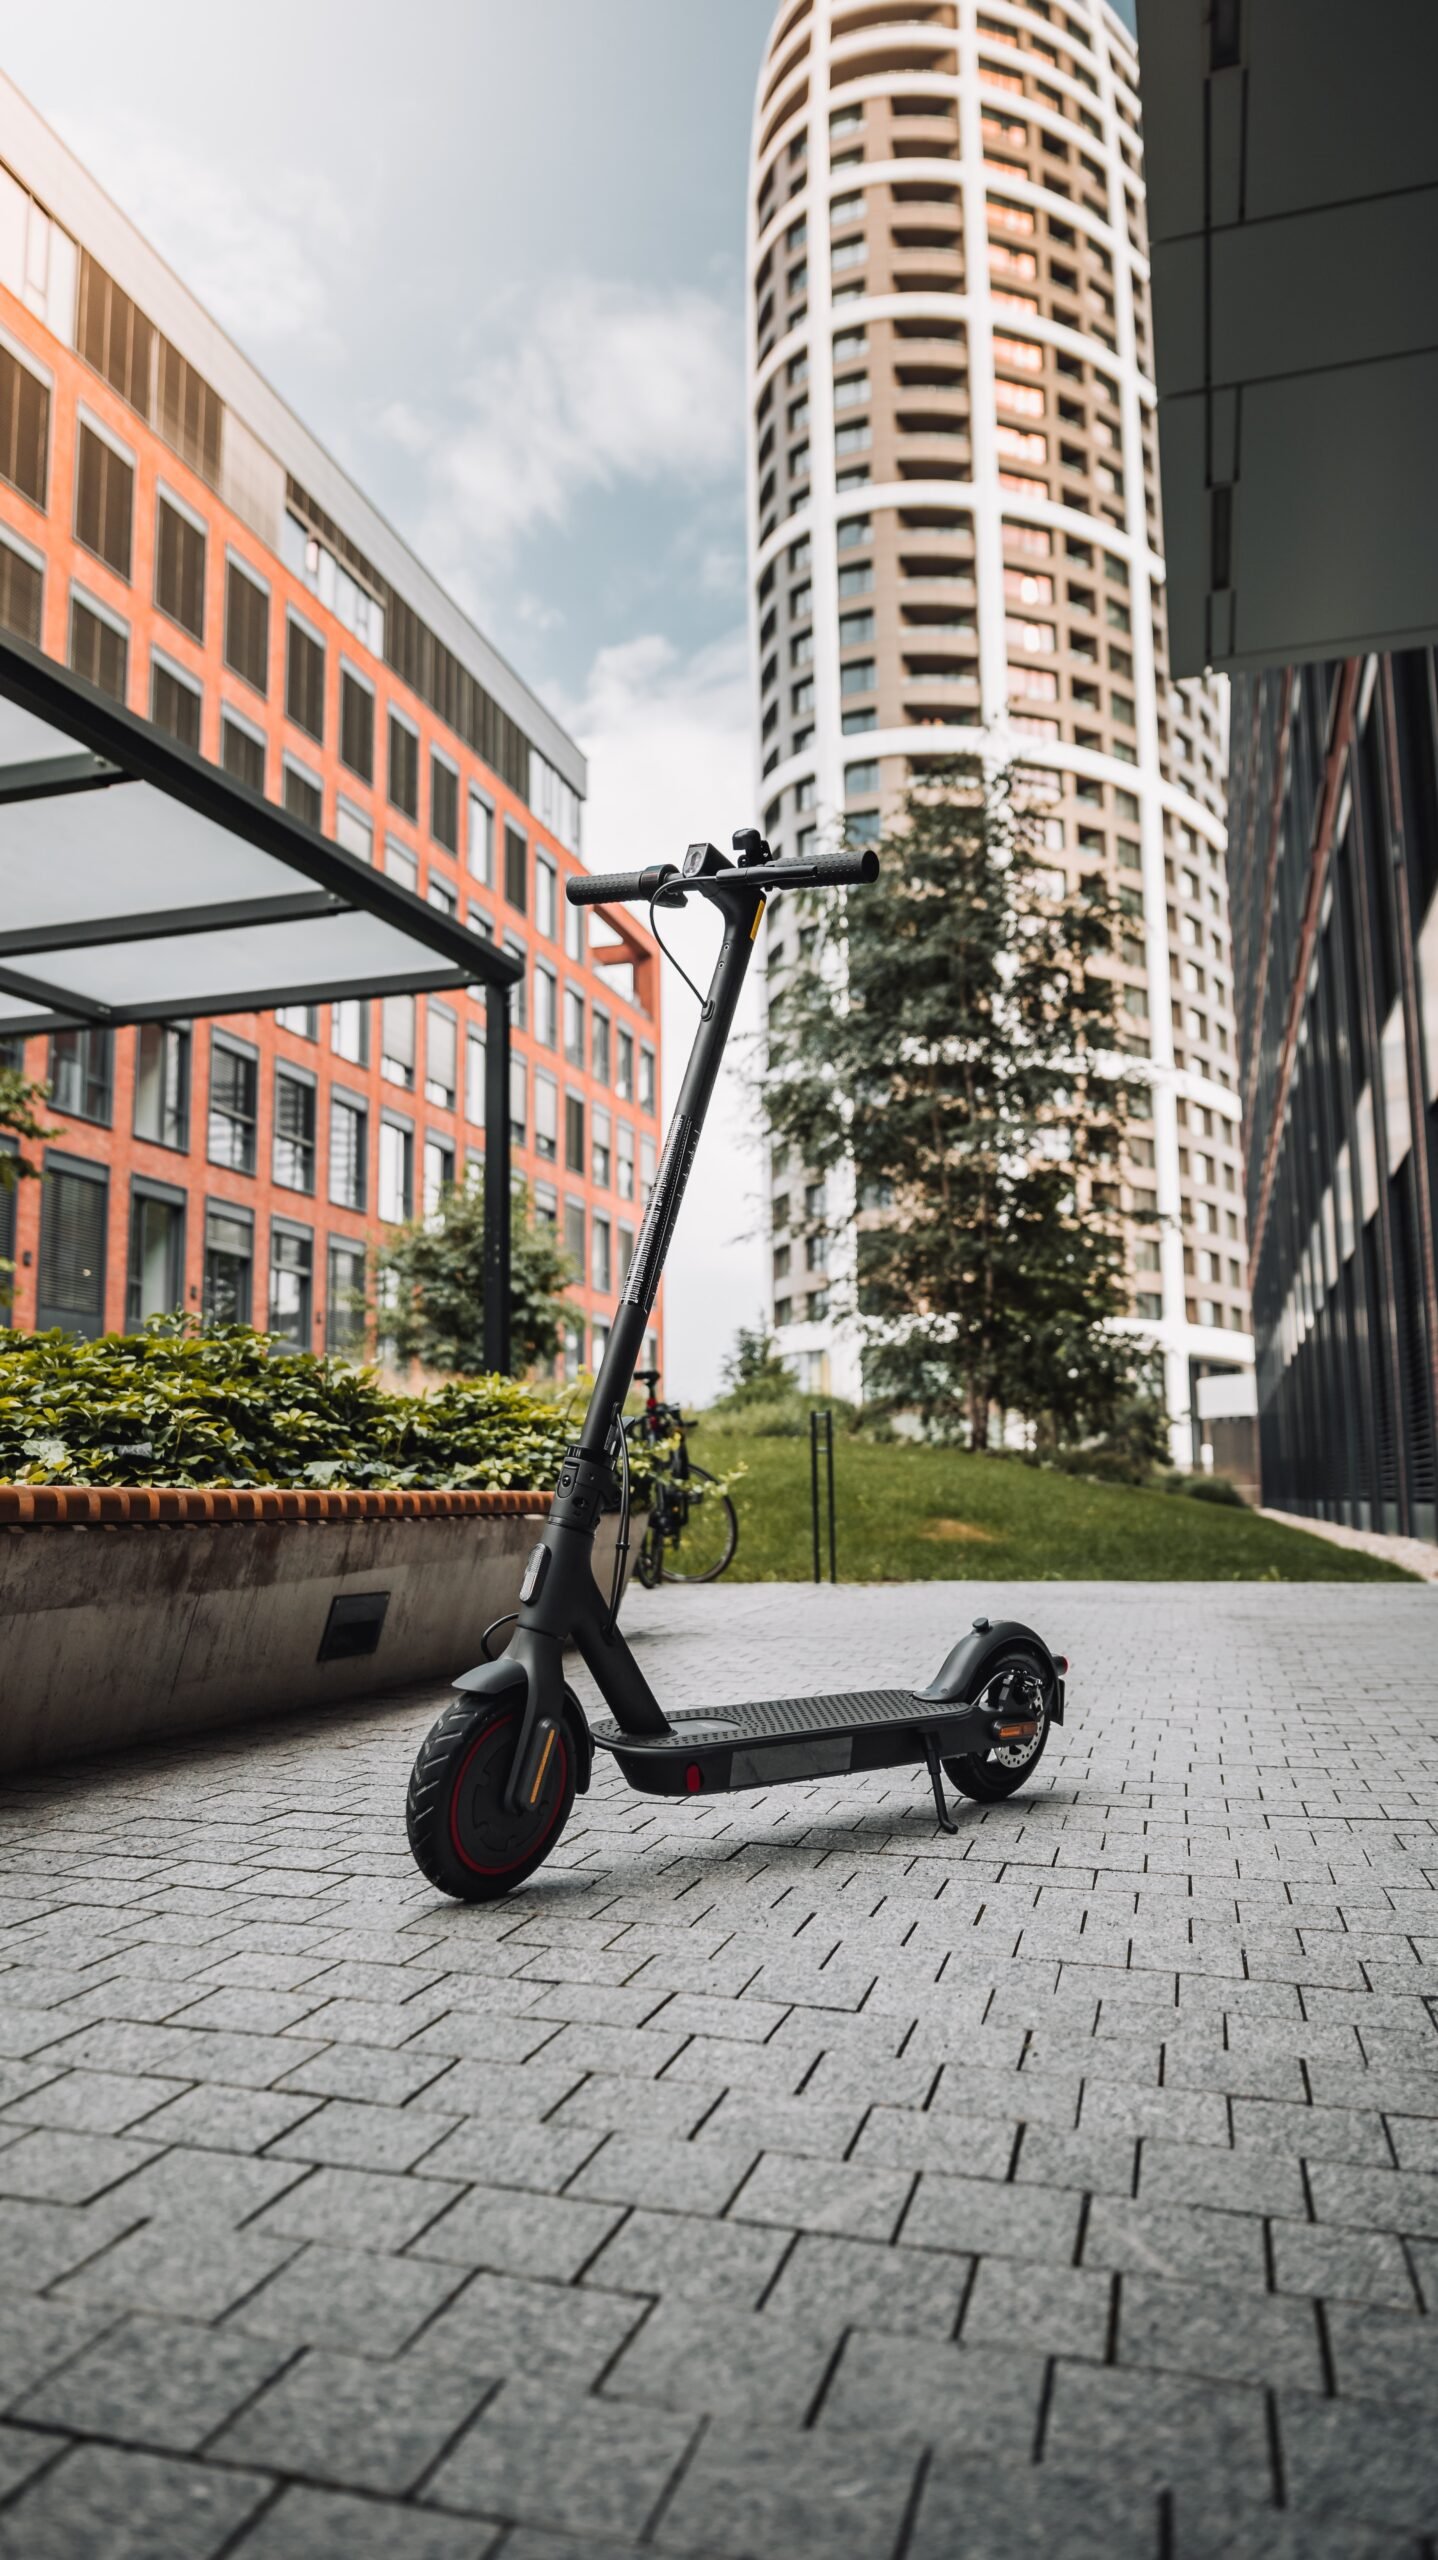 Can I Ride My Electric Scooter In Crowded Urban Areas?